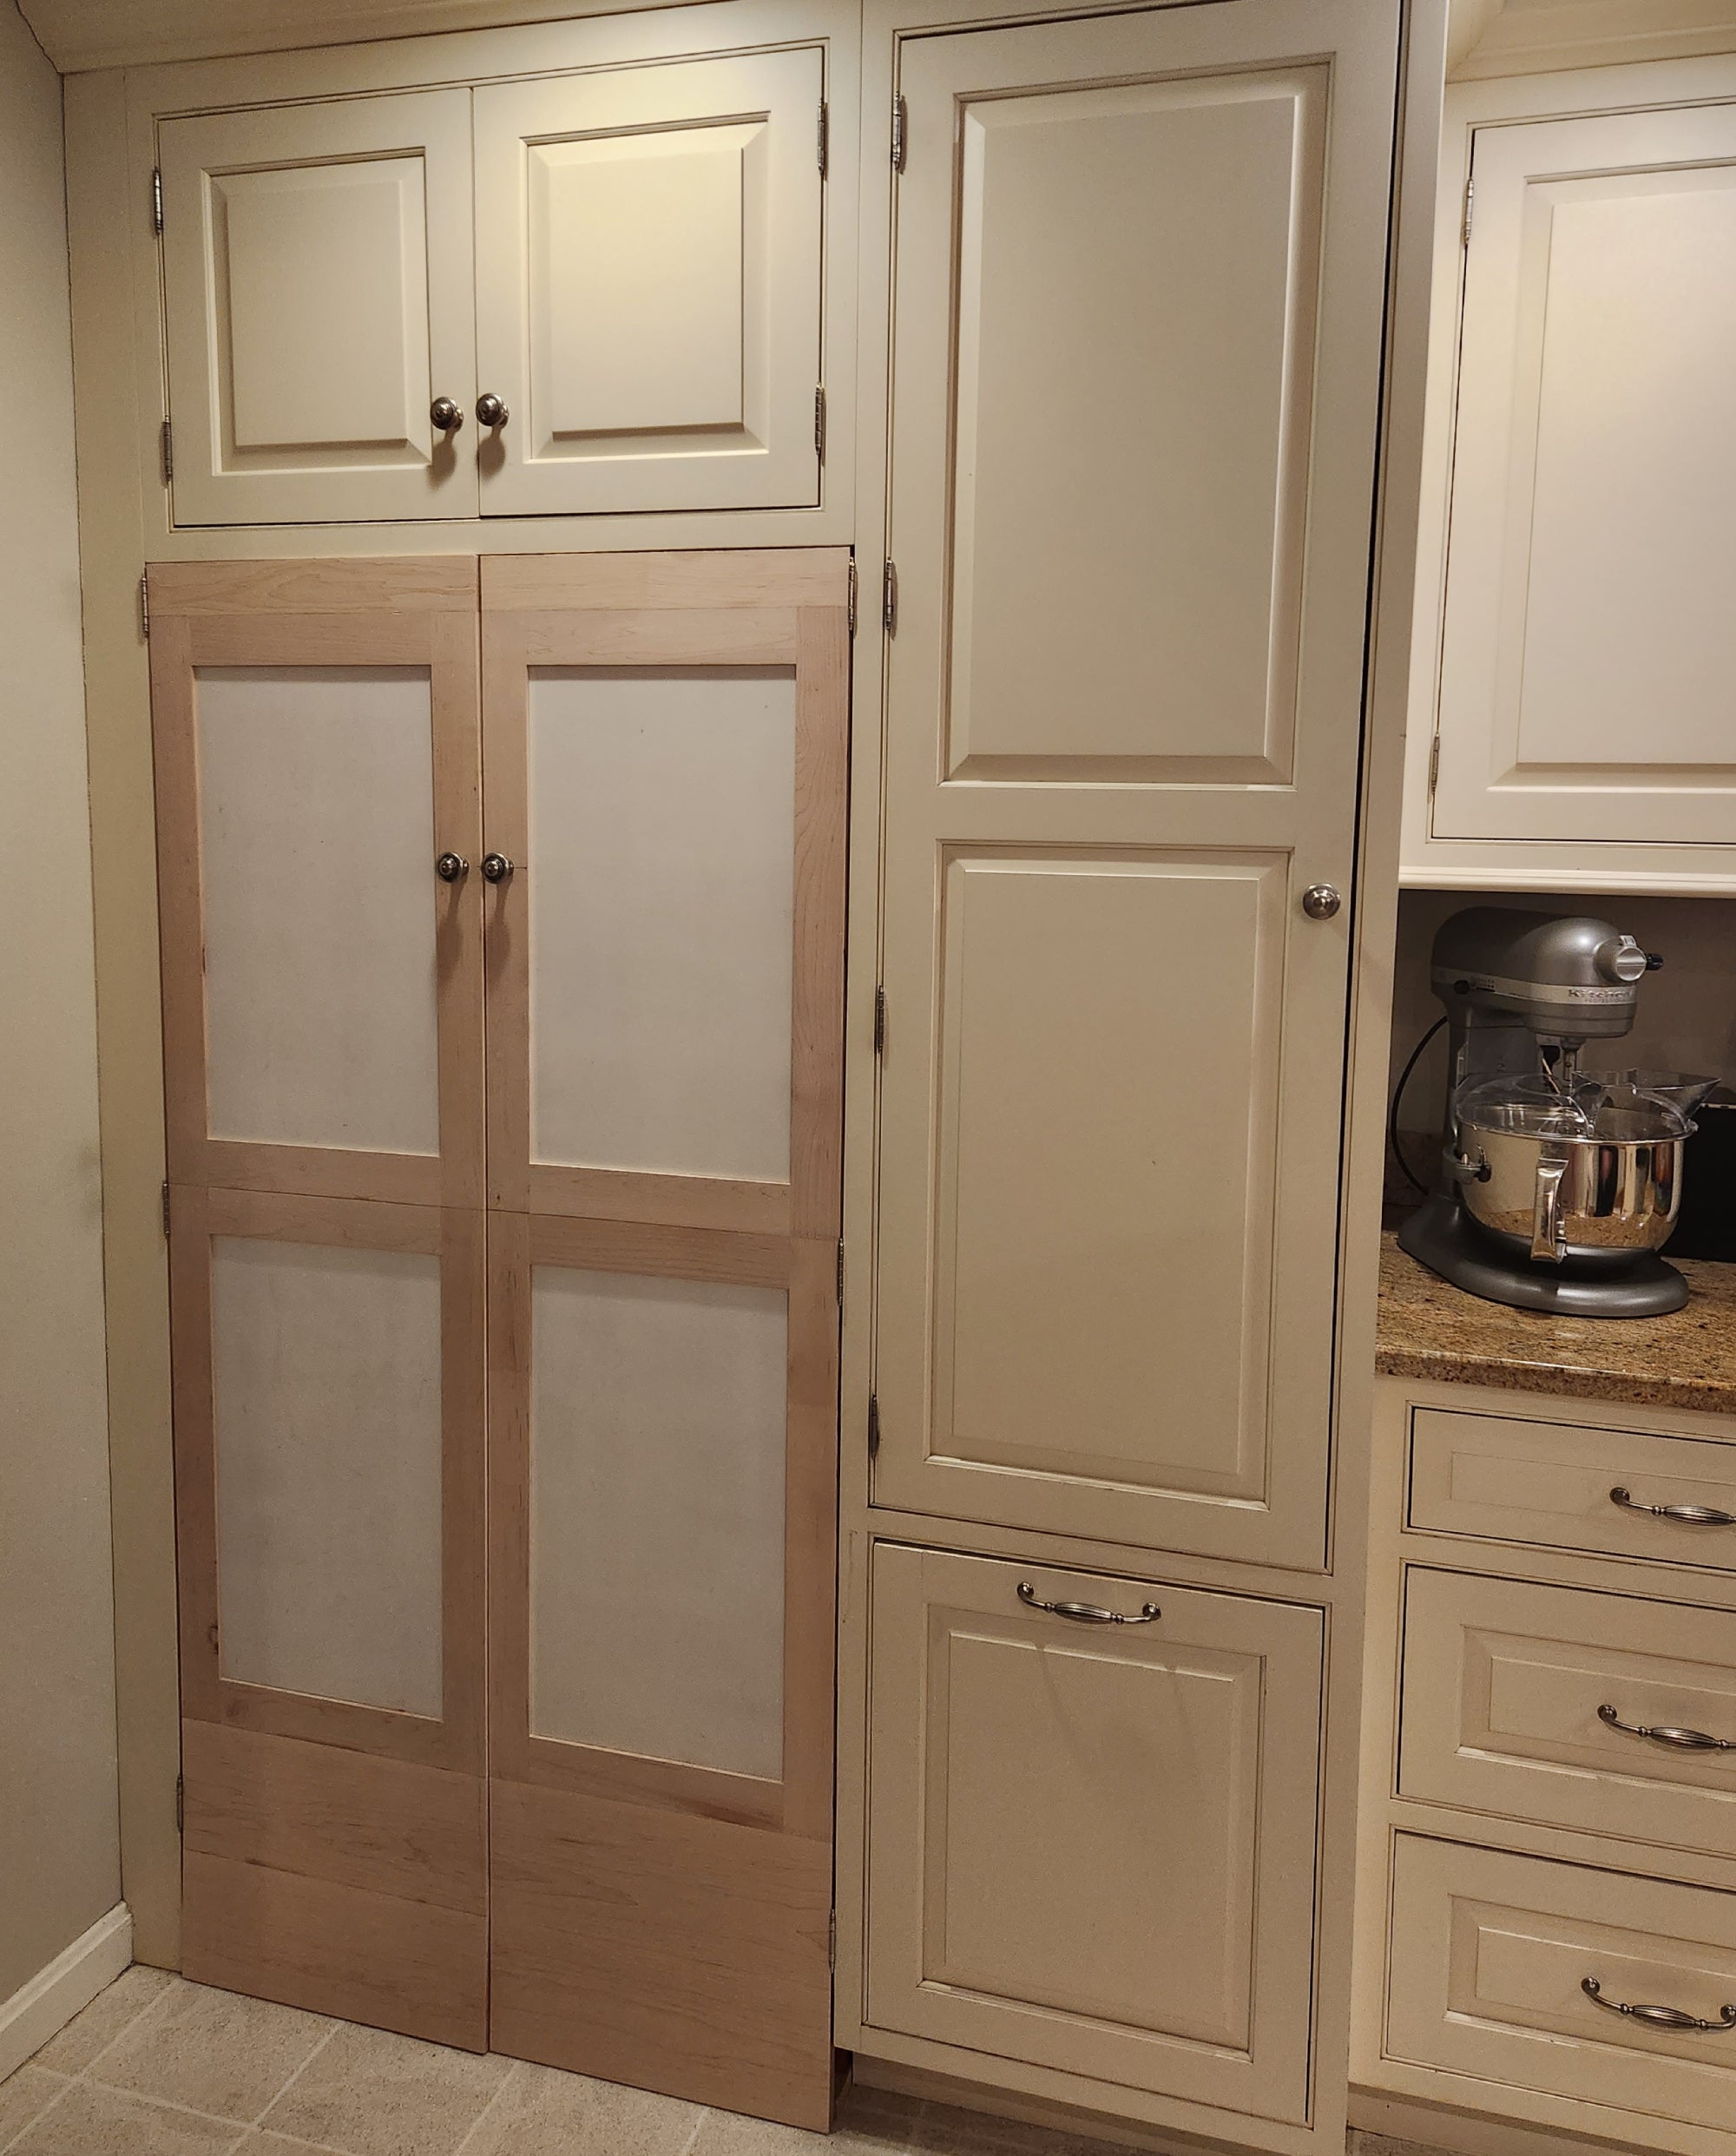 Homemade pantry doors in a kitchen.